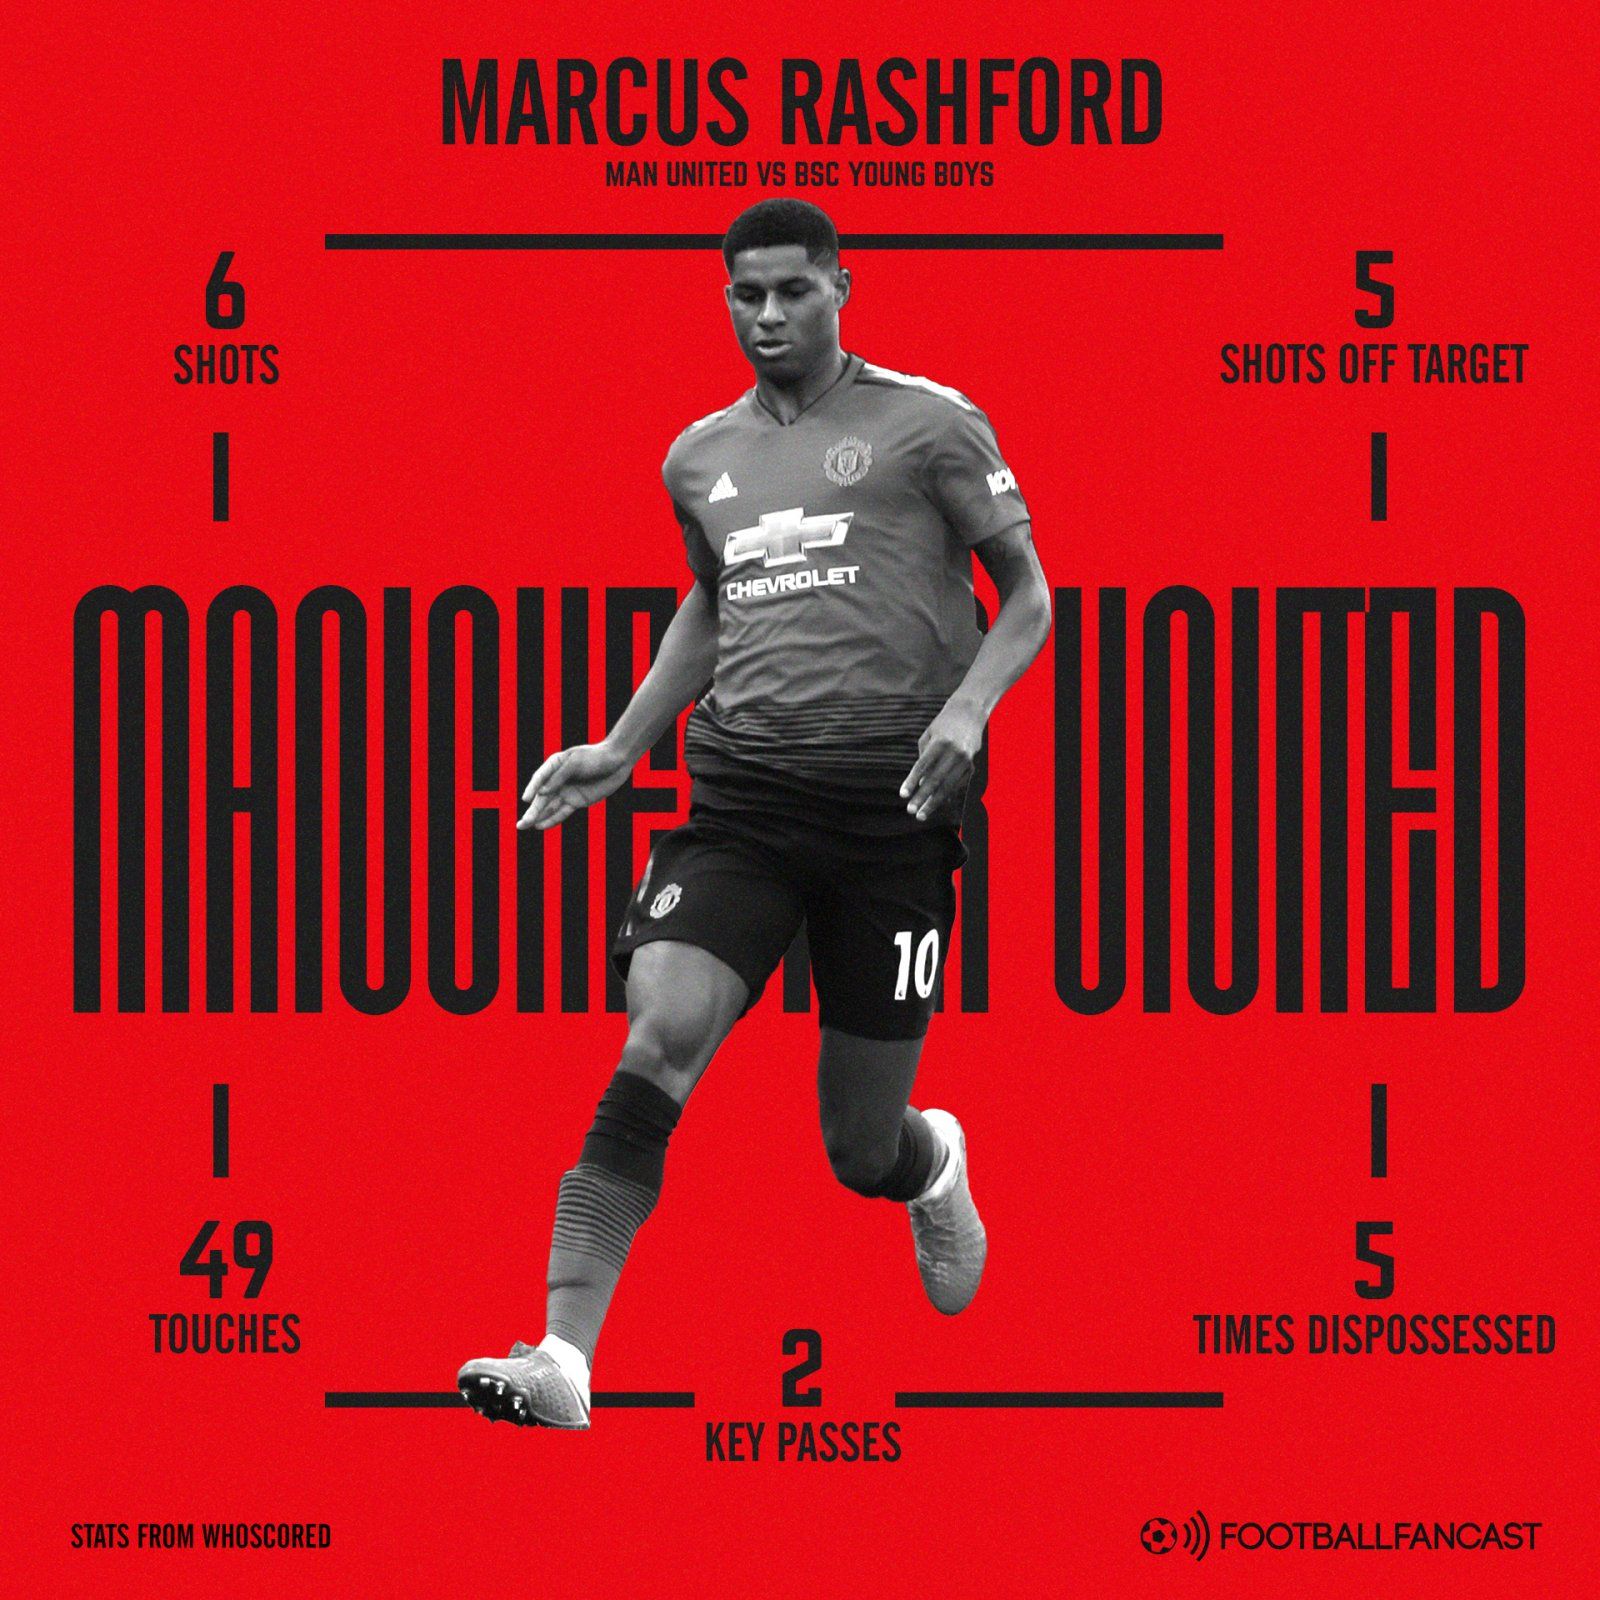 Marcus Rashford stats for Manchester United against BSC Young Boys